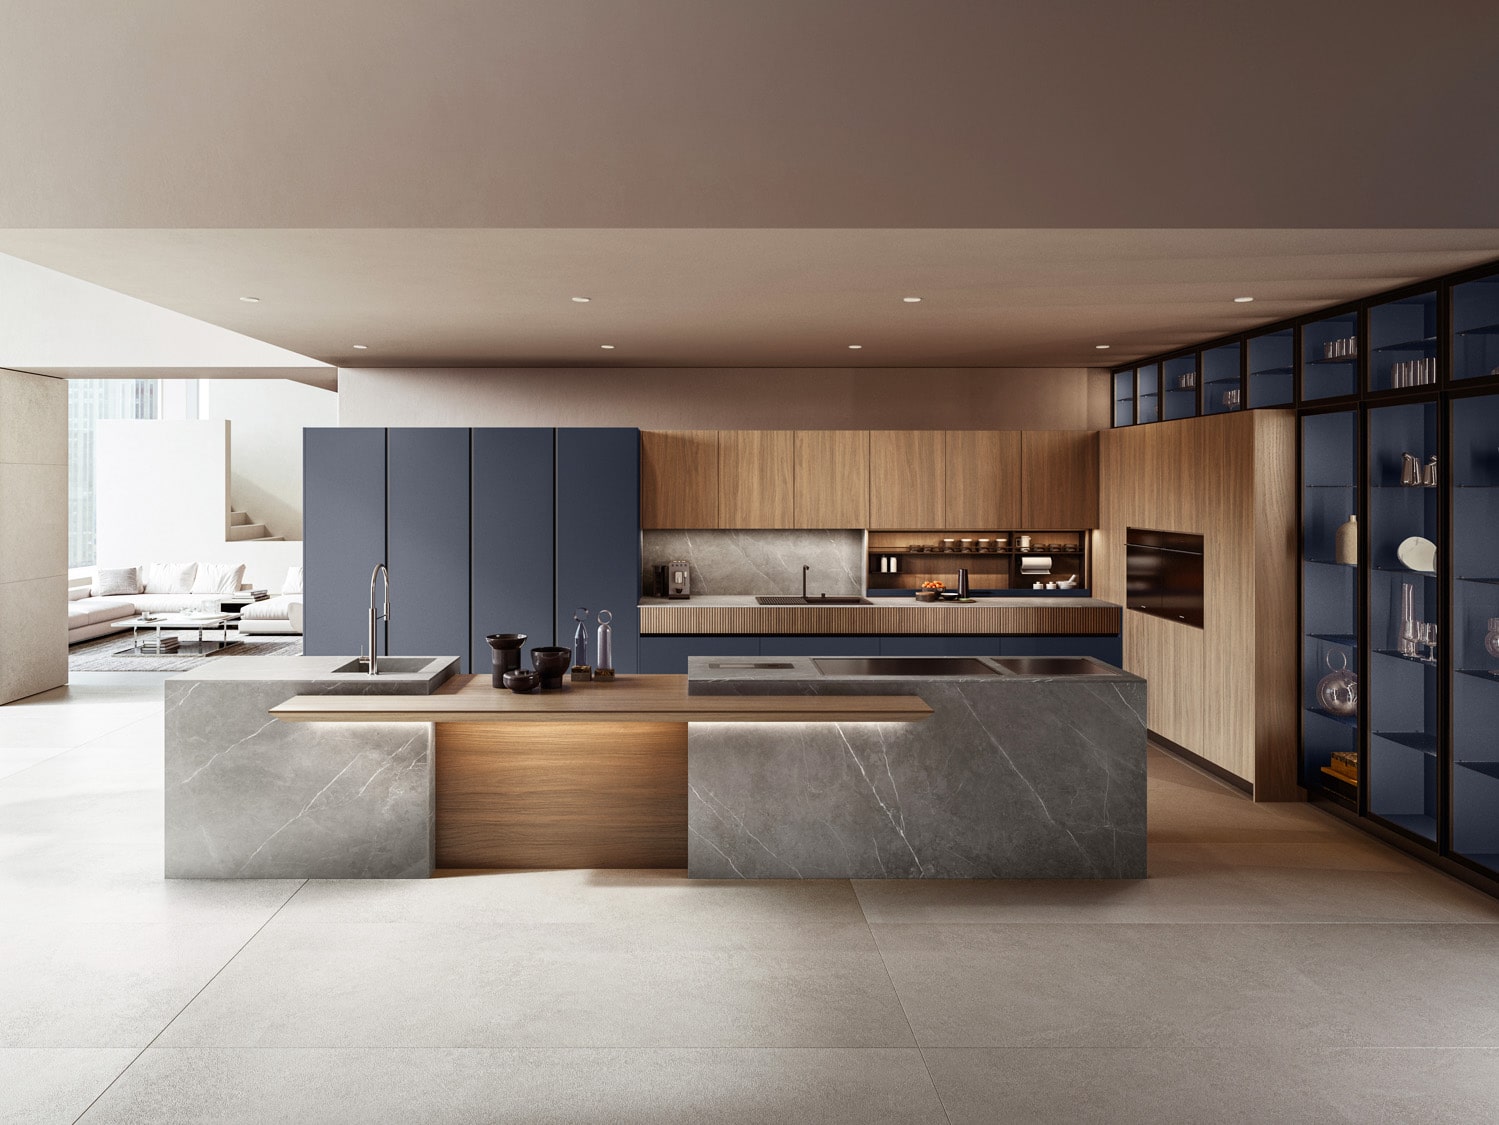 Different materials define the various functional areas. Skyline cabinets in Gres Pietra Grey (island) combine with cabinets in Walnut and Blu Petrolio micalized lacquer.